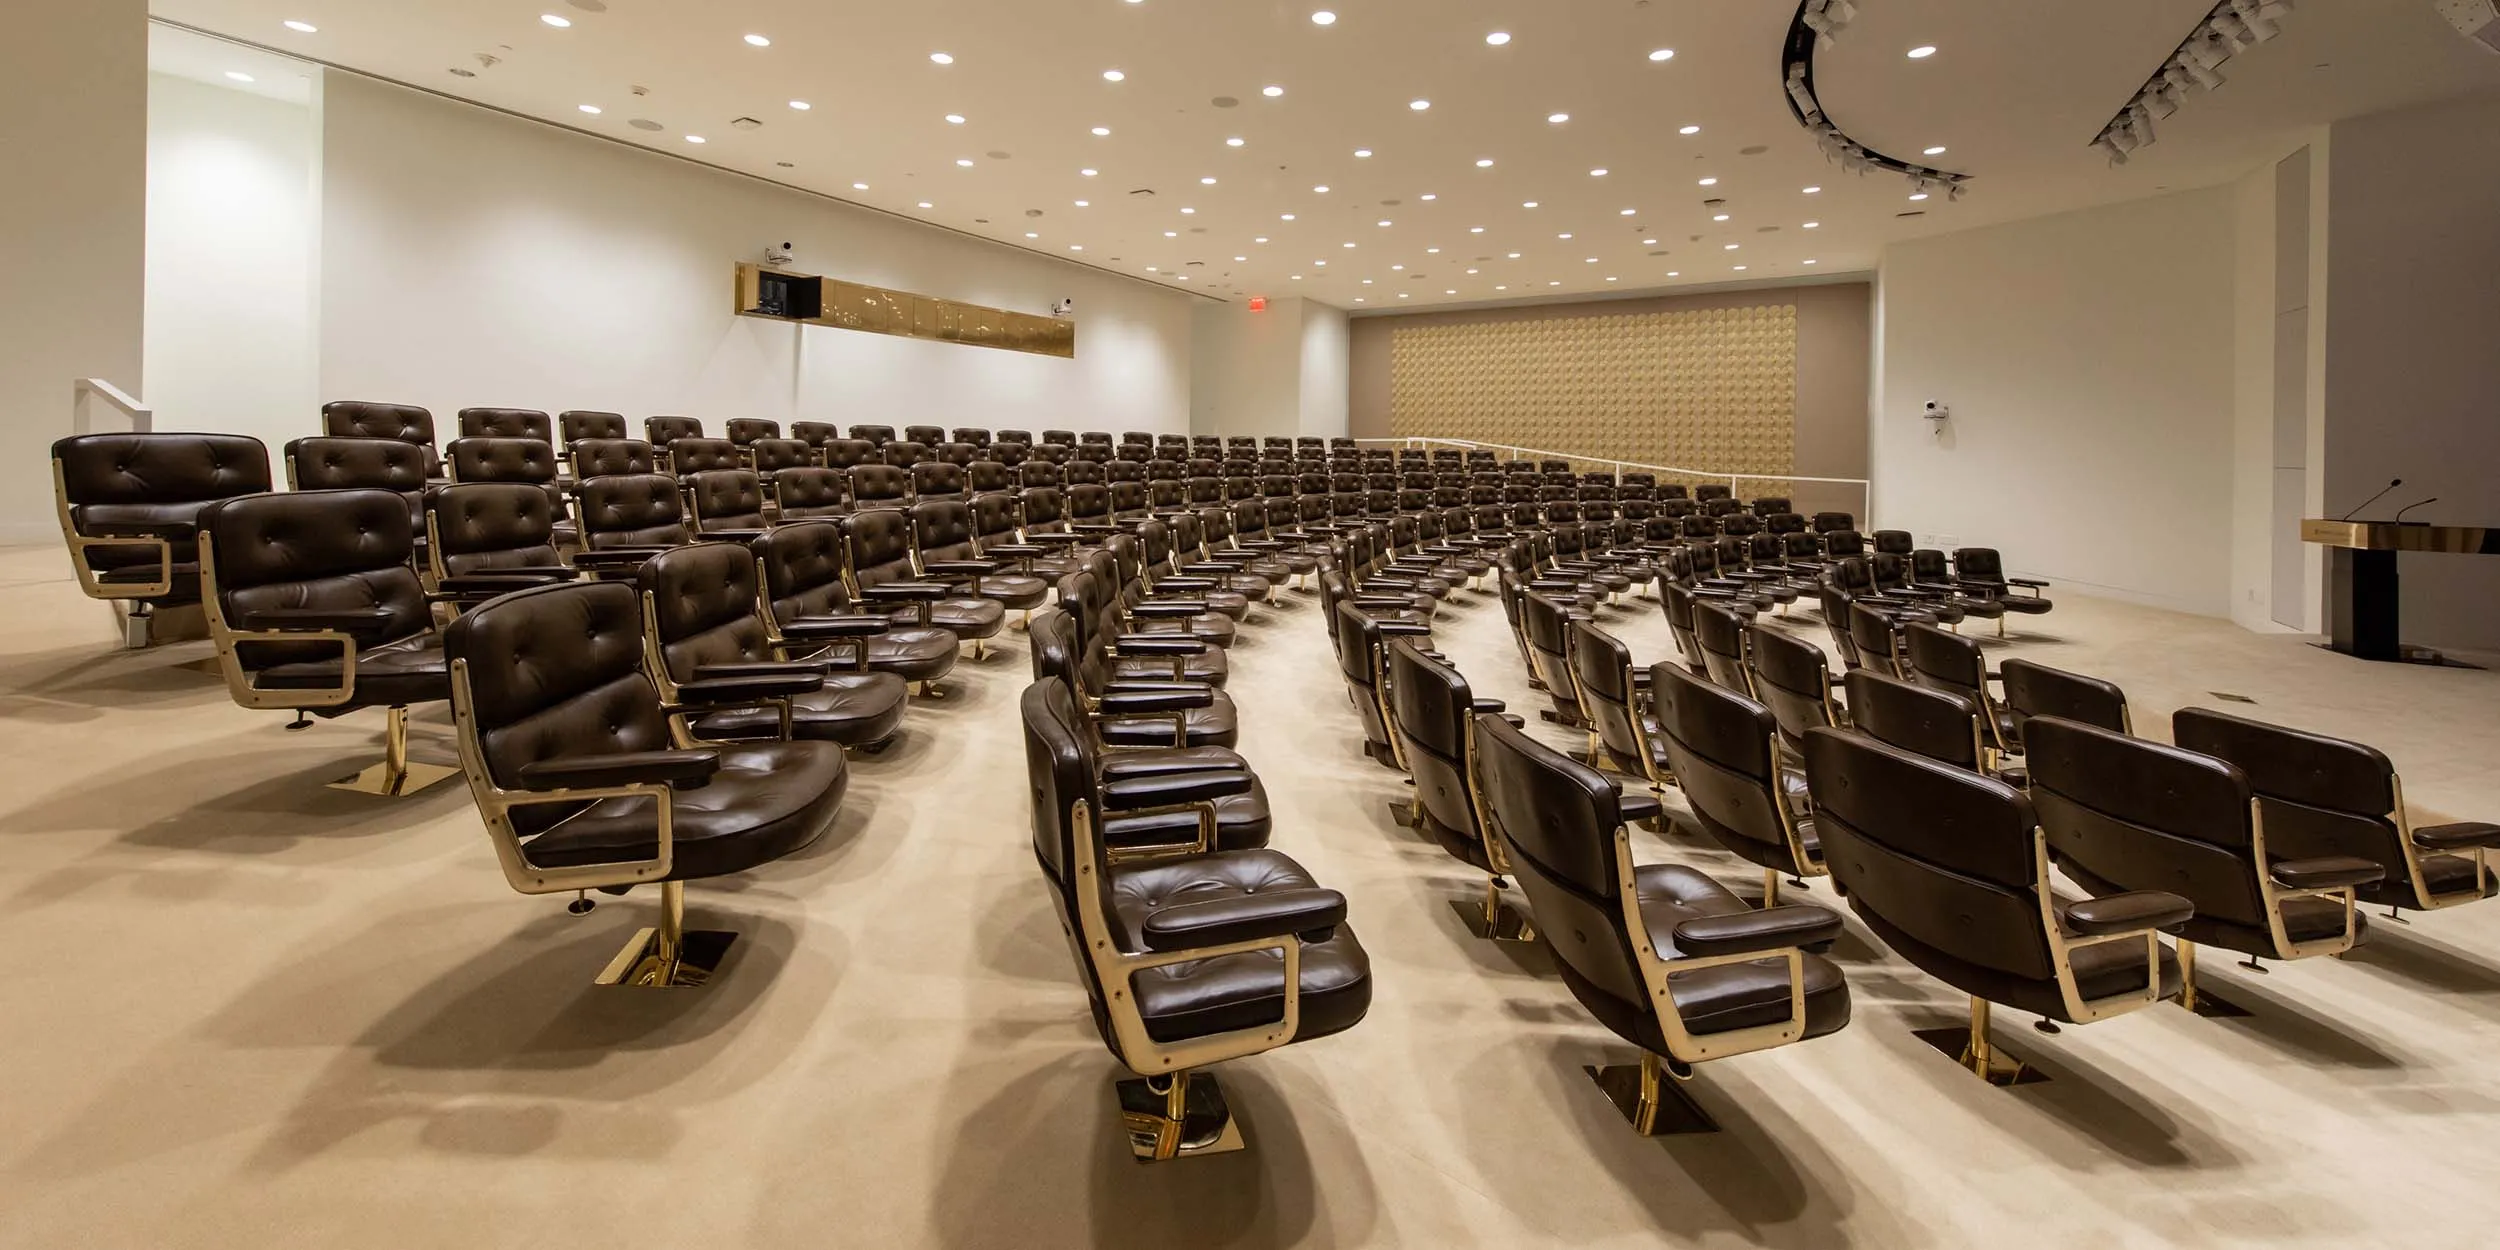 An empty auditorium with rows of brown leather chairs. Behind them is a tan upholstered wall with gold circles.